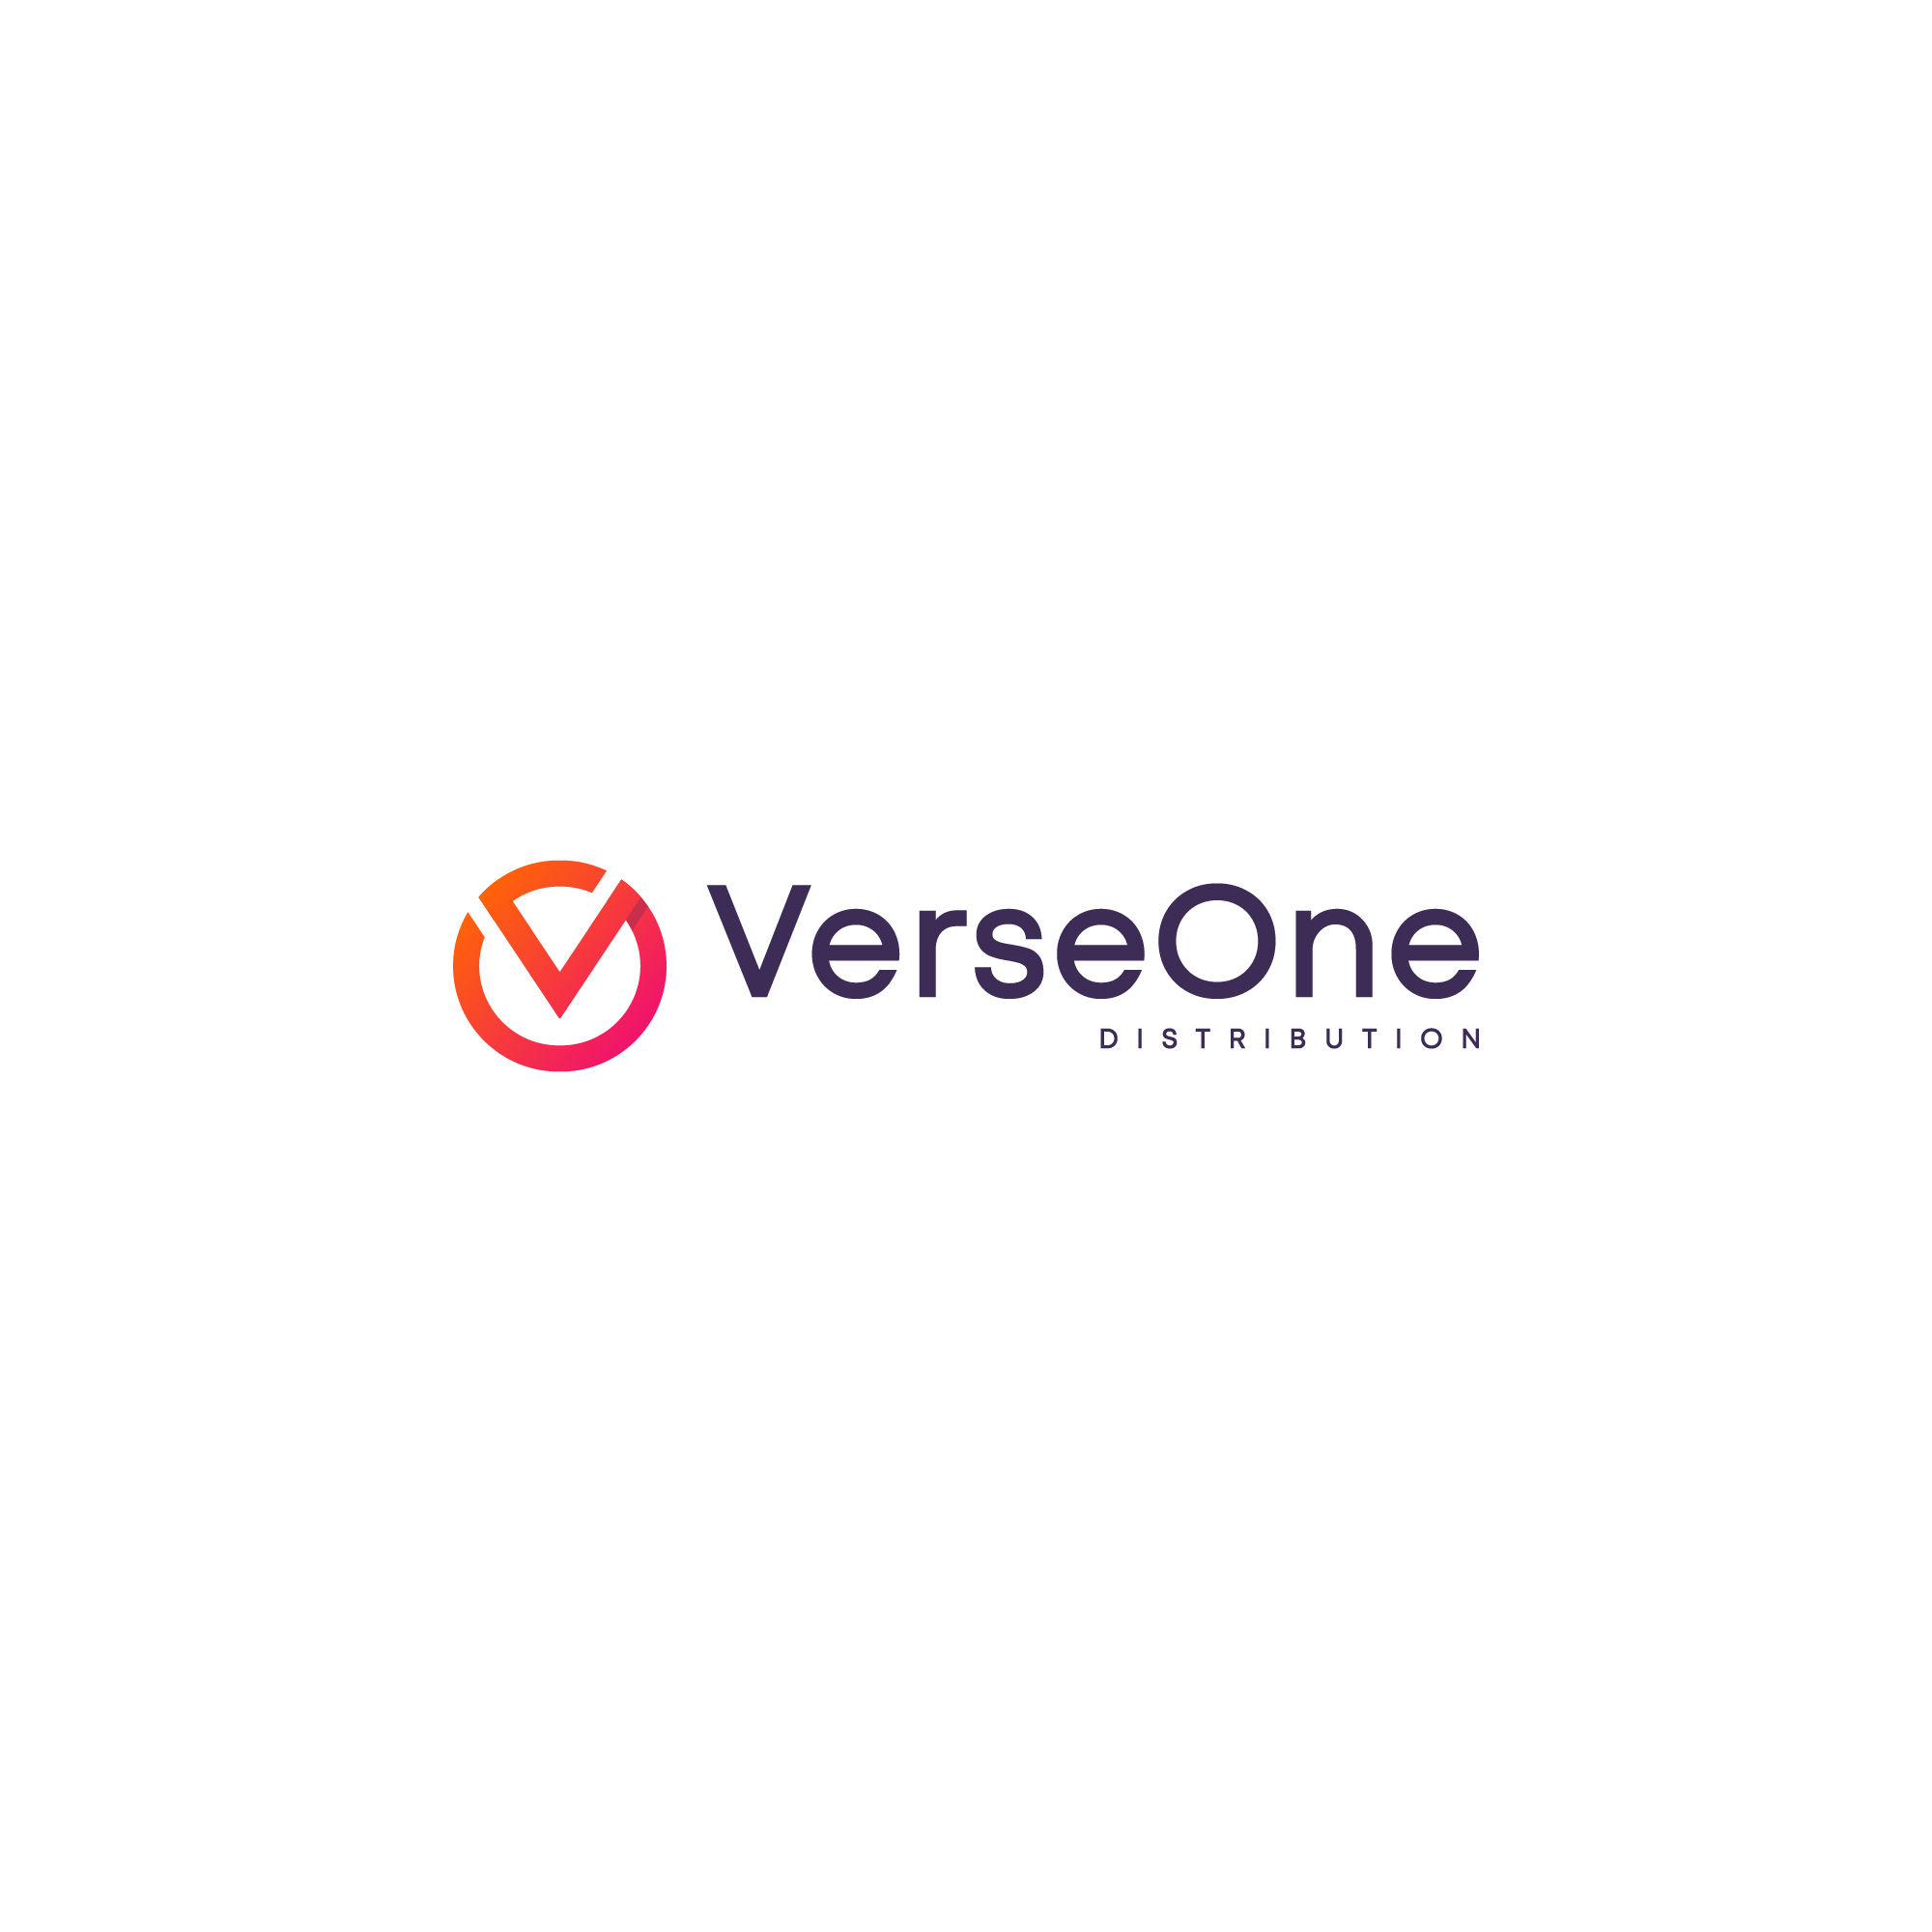 VERSEONE UNVEILS INNOVATIVE ‘MARKETPLACE’ PLATFORM TO DEMOCRATISE MUSIC PROMOTIONS FOR INDEPENDENT ARTISTS WORLDWIDE